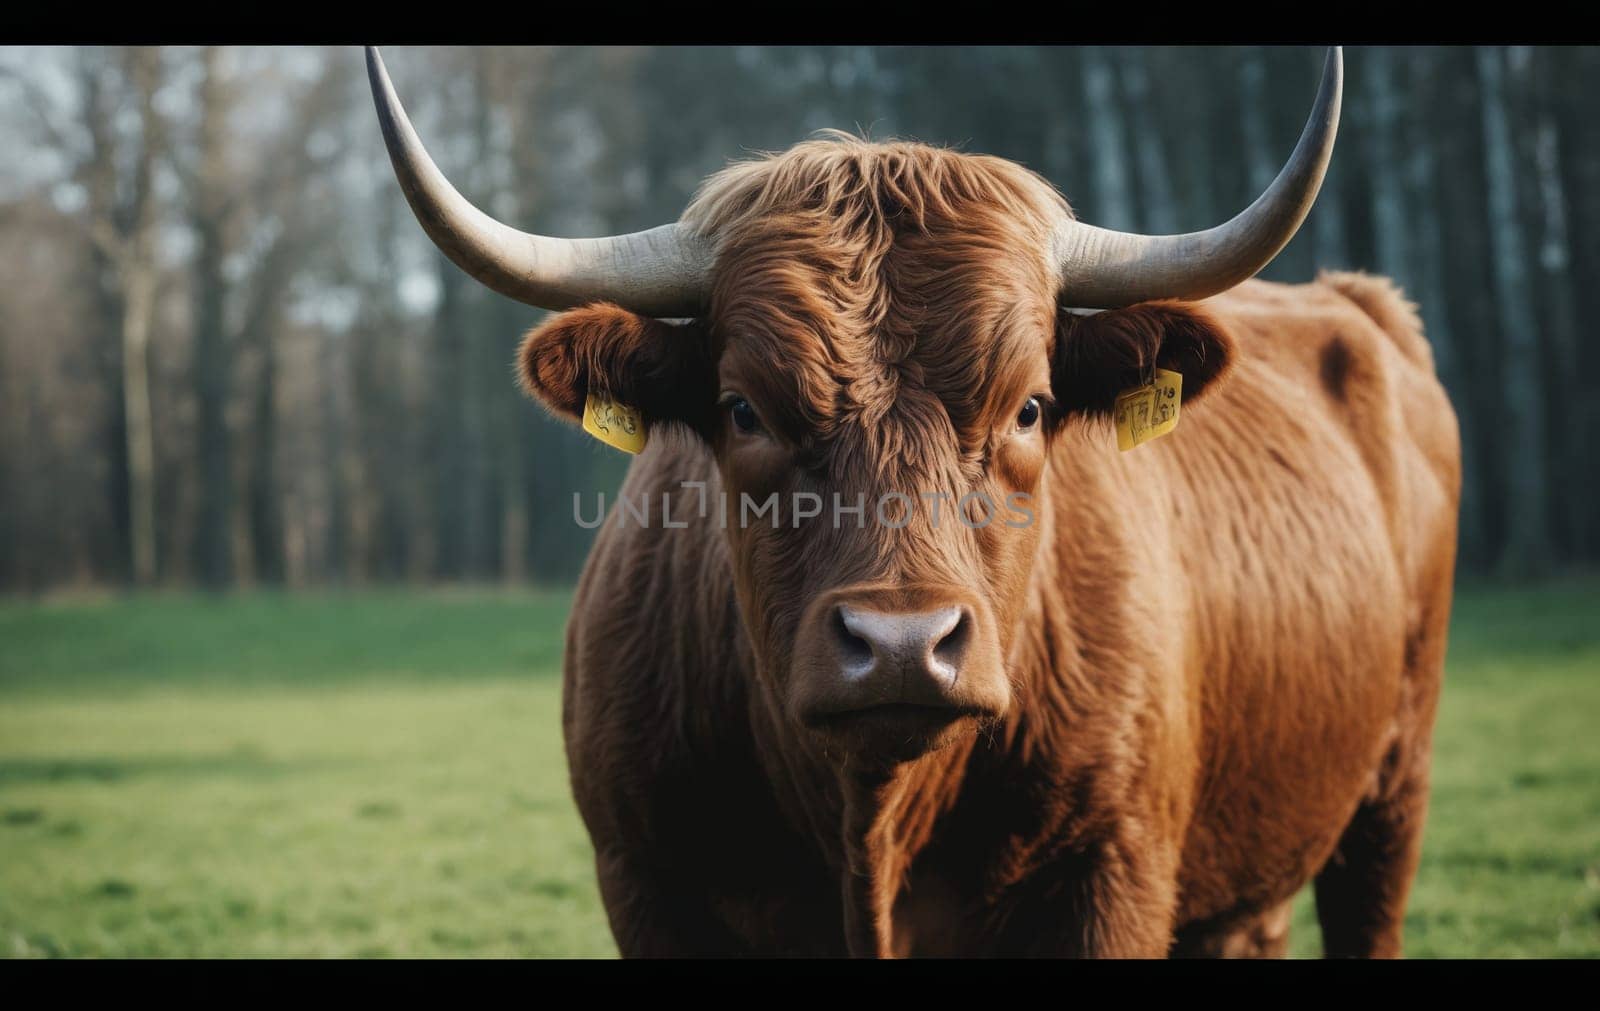 A bull with long horns is grazing in a grassy meadow, gaze fixed on the camera by Andre1ns